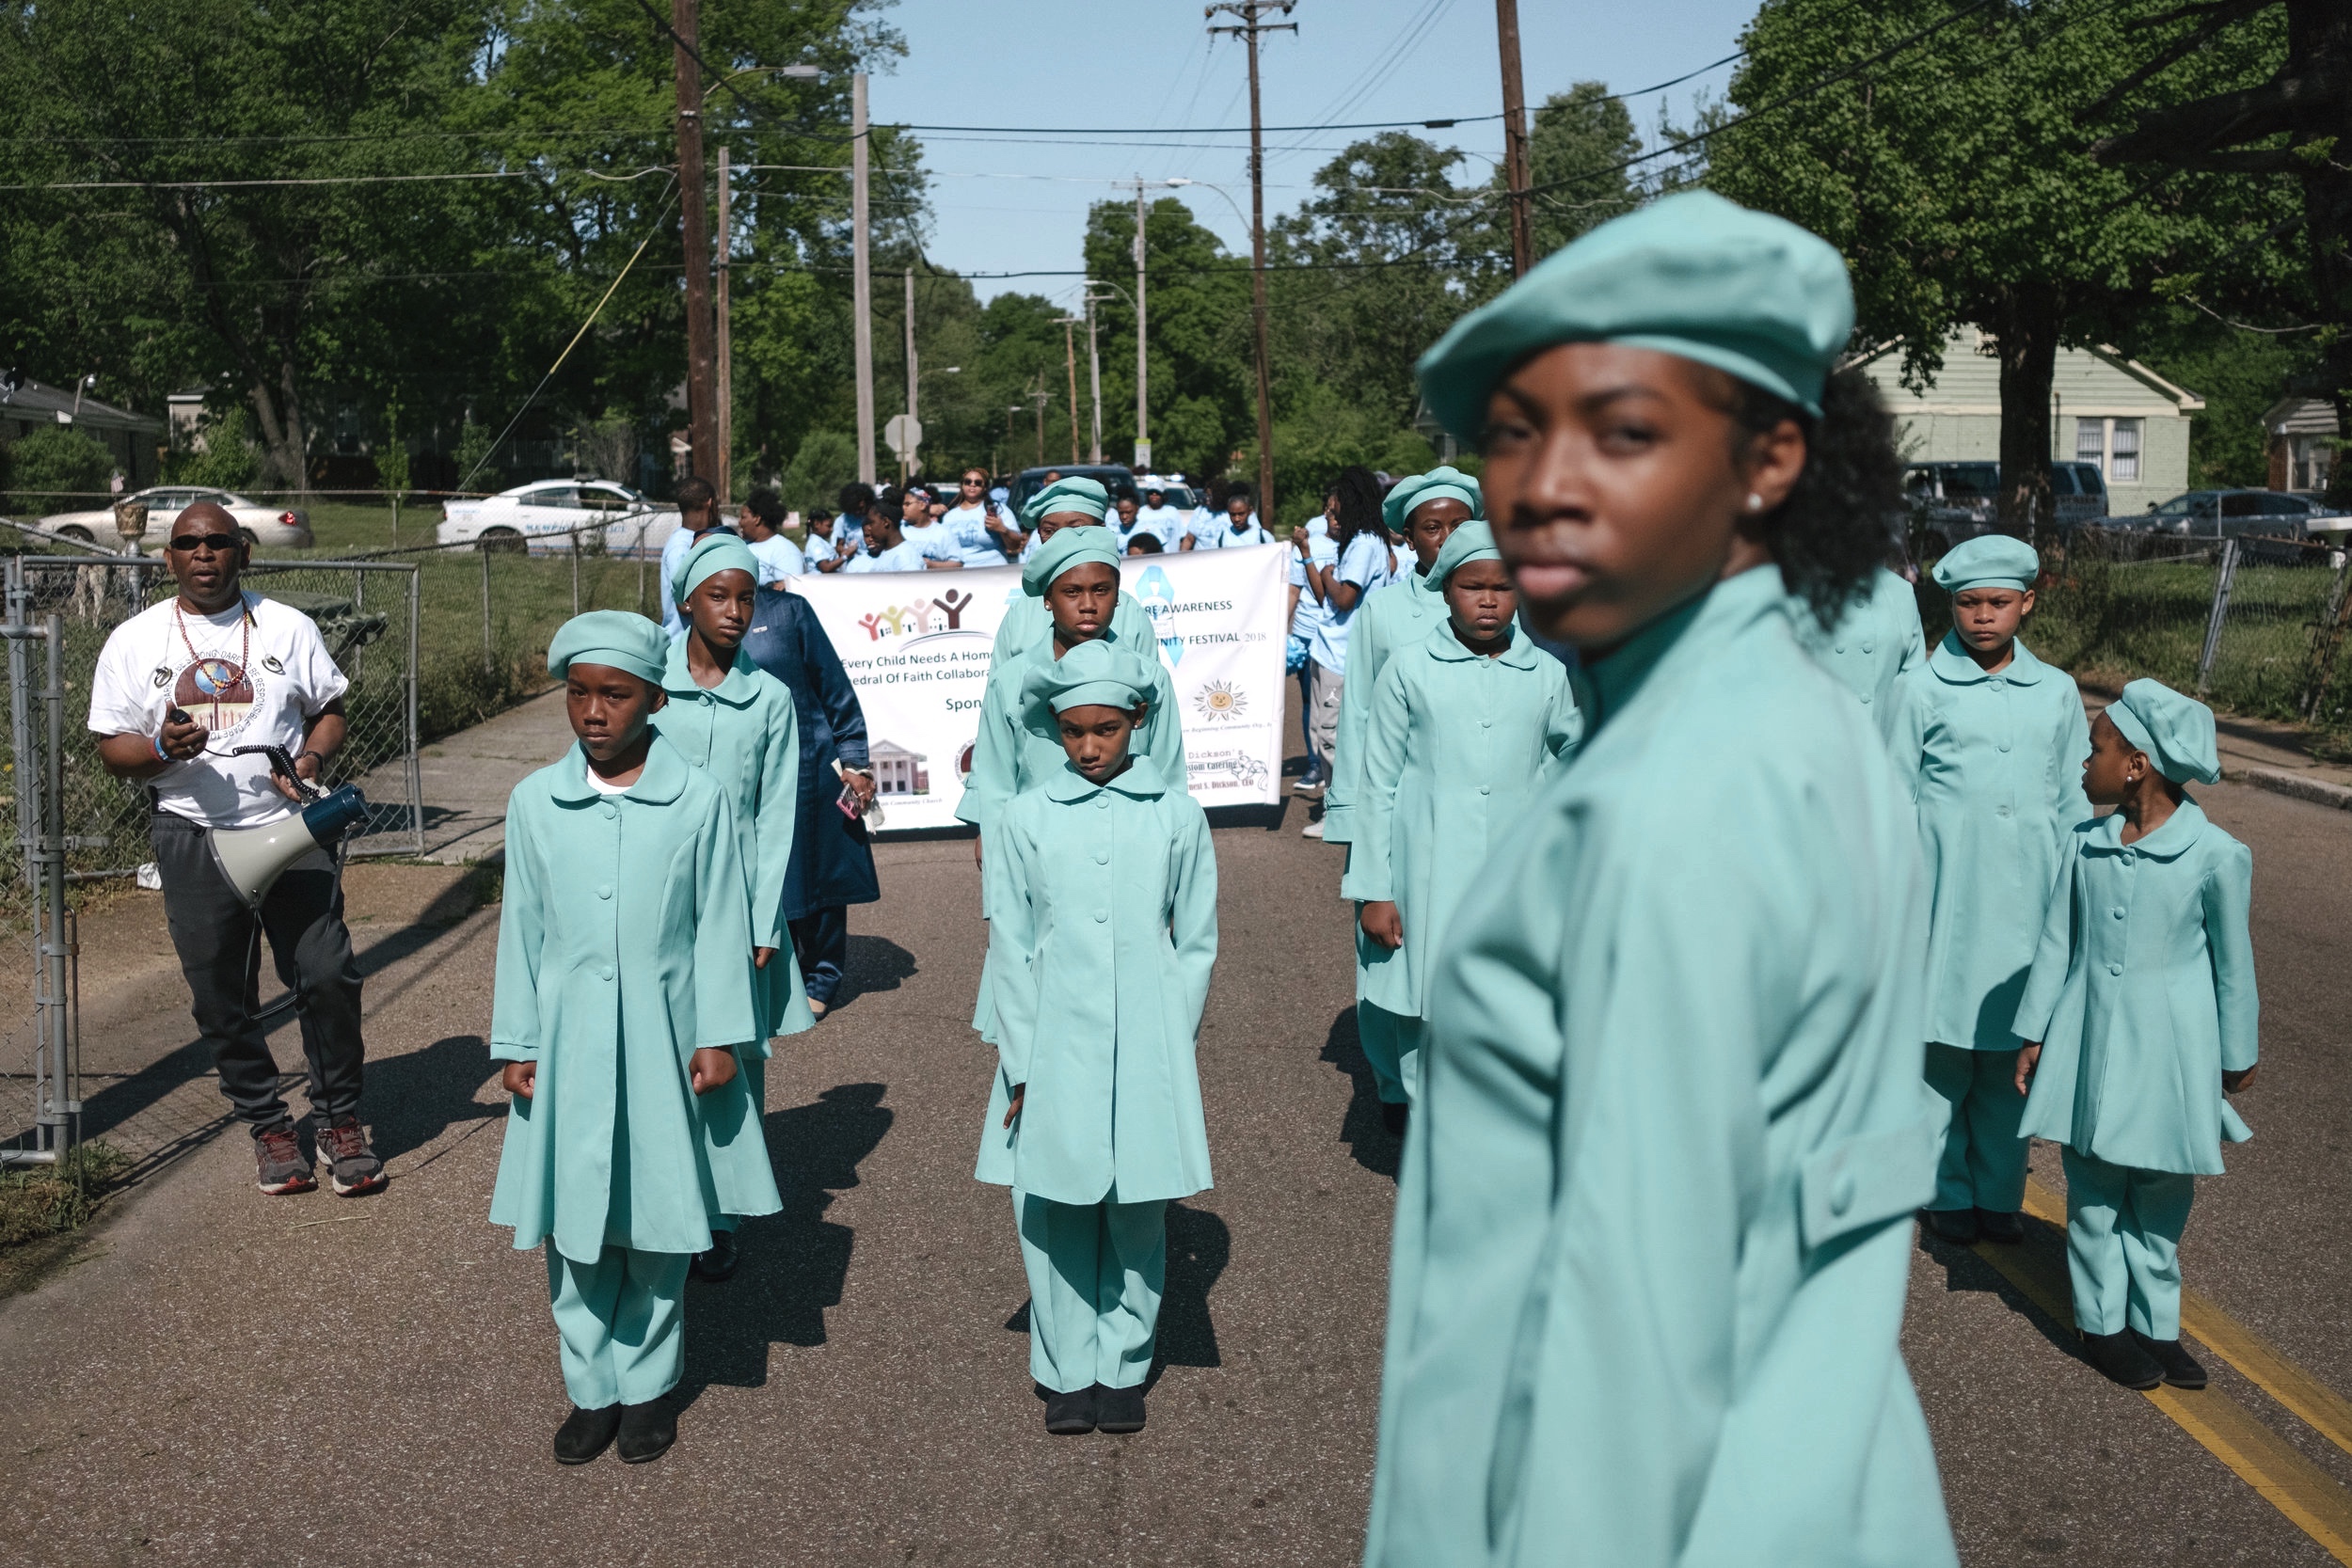  The Muslim Girls Training &amp; General Civilization Class with the Nation of Islam prepare to march in The Foster Care Awareness parade in the north Memphis neighborhoods of Klondike-Smokey City, May 5, 2018. 